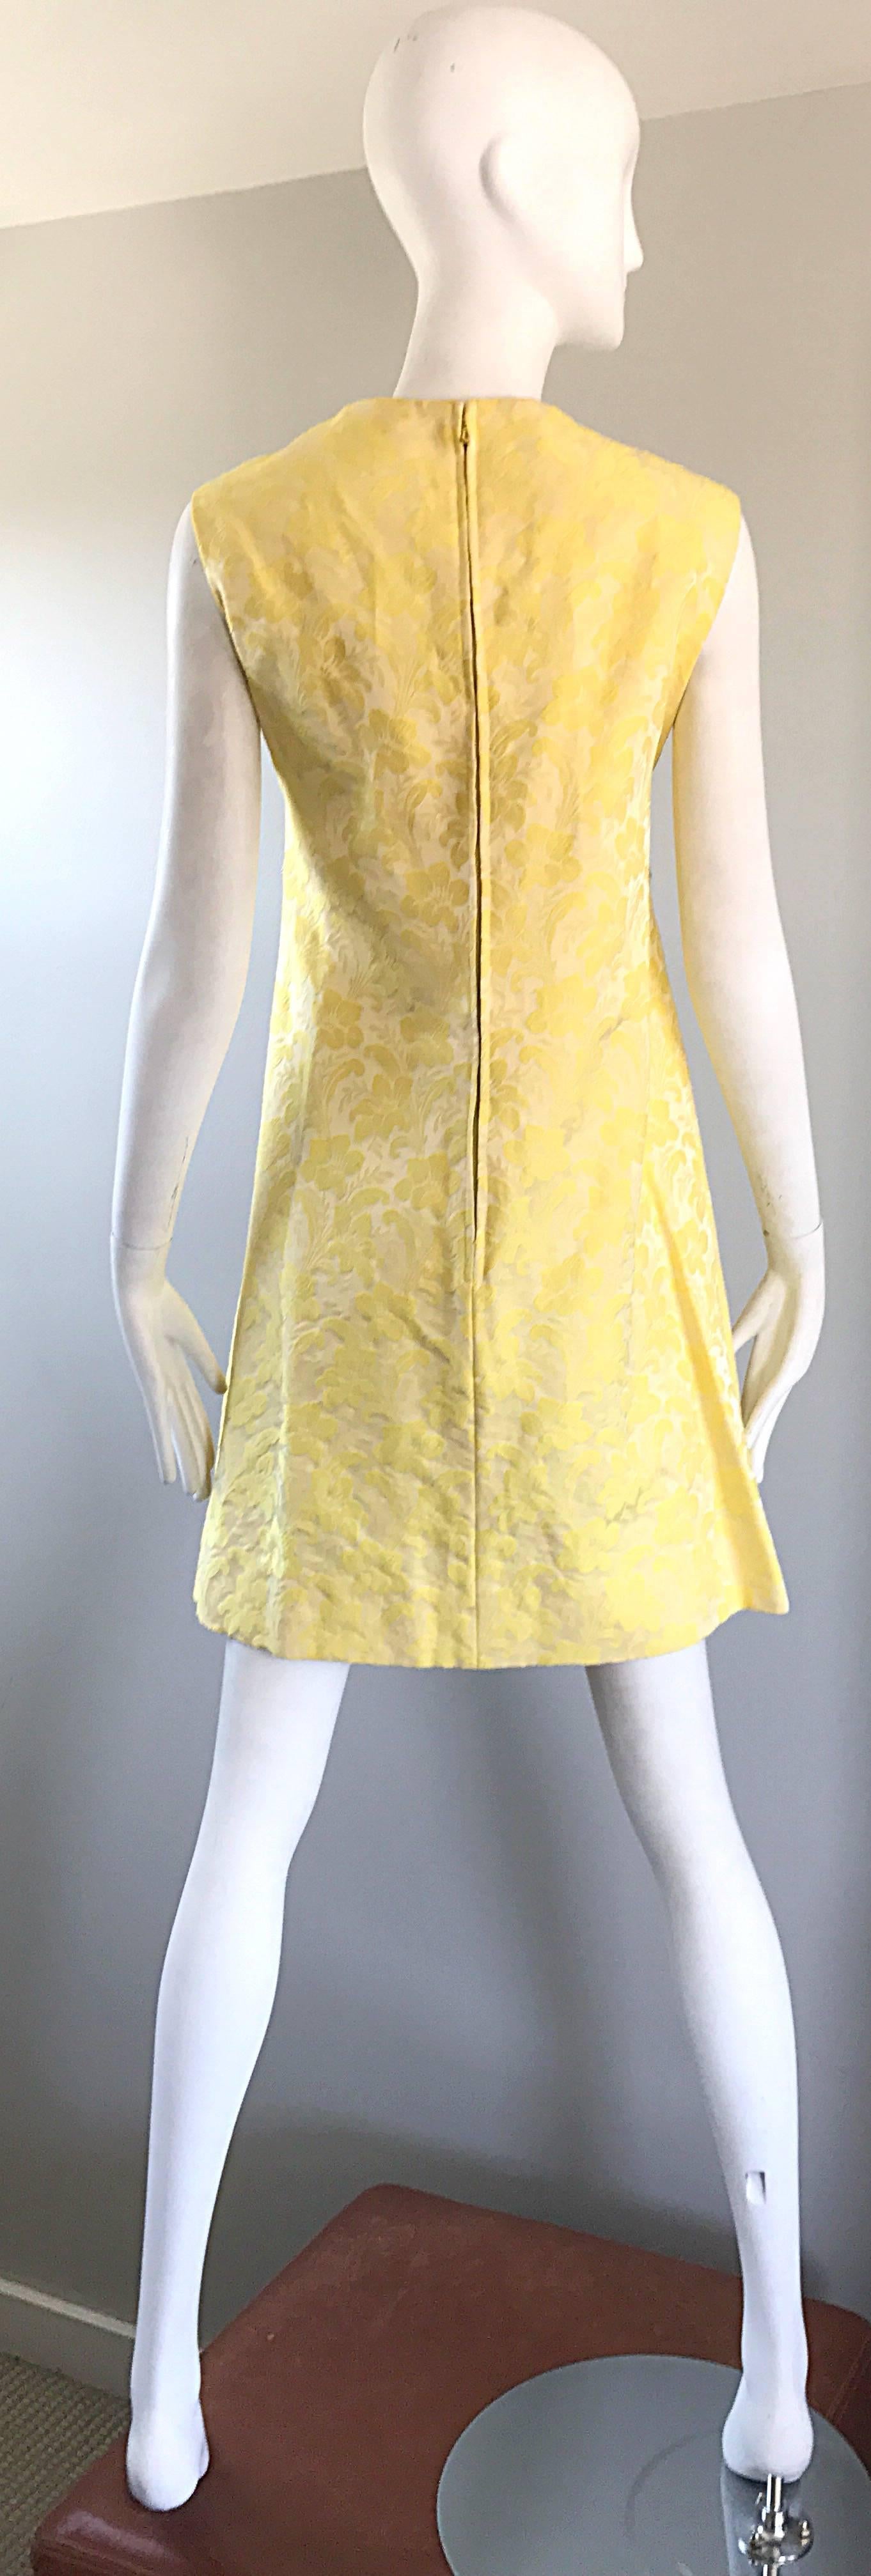 Chic 1960s Mademoiselle Canary Yellow Silk Borcade A - Line Dress & Jacket Suit For Sale 1